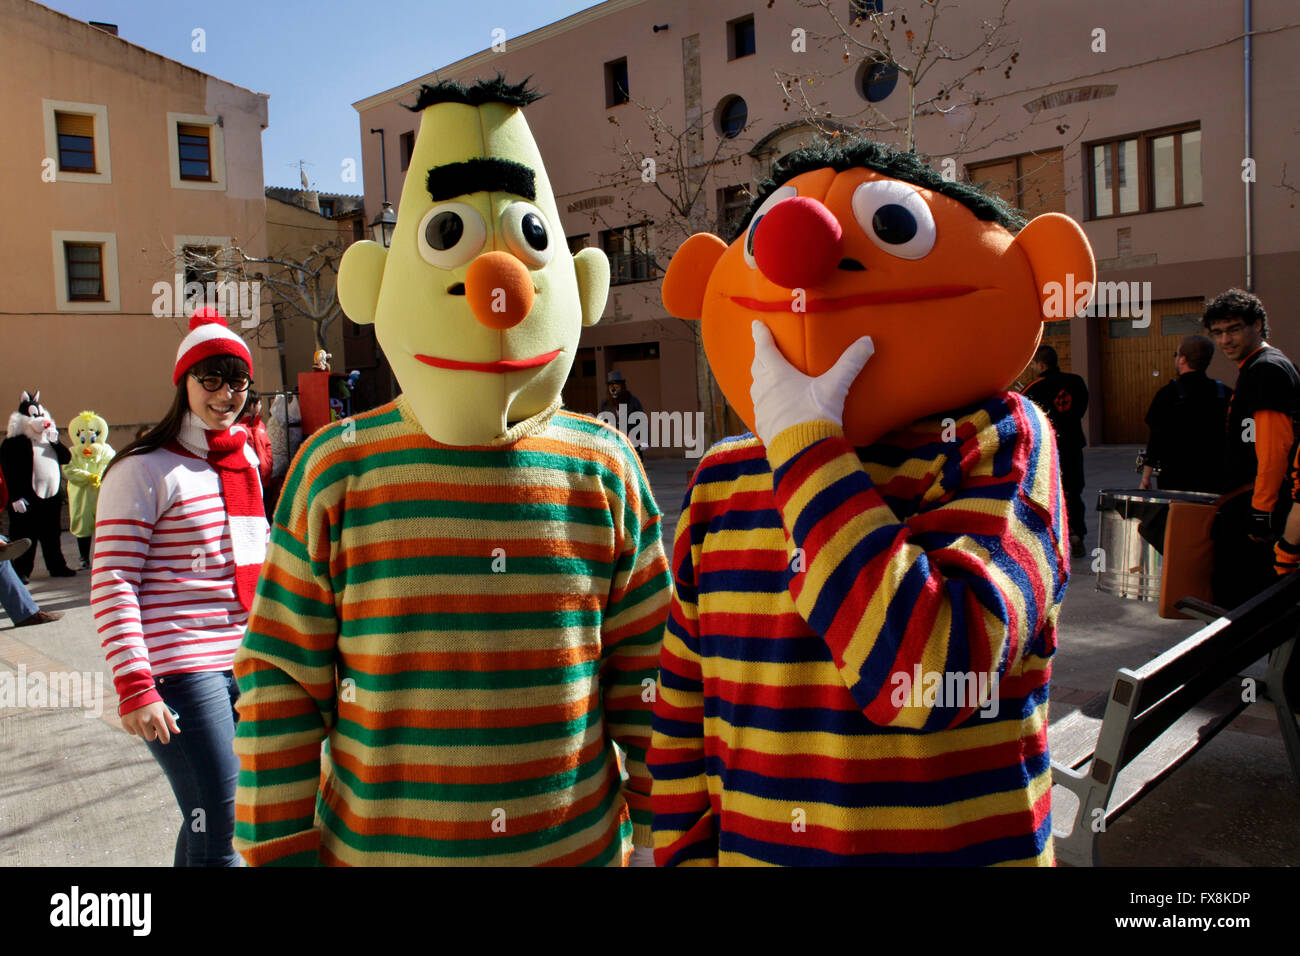 Ernie and Bert costumes, also Wally, during the carnival in Montblanc, Tarragona, Catalonia, Spain. Stock Photo